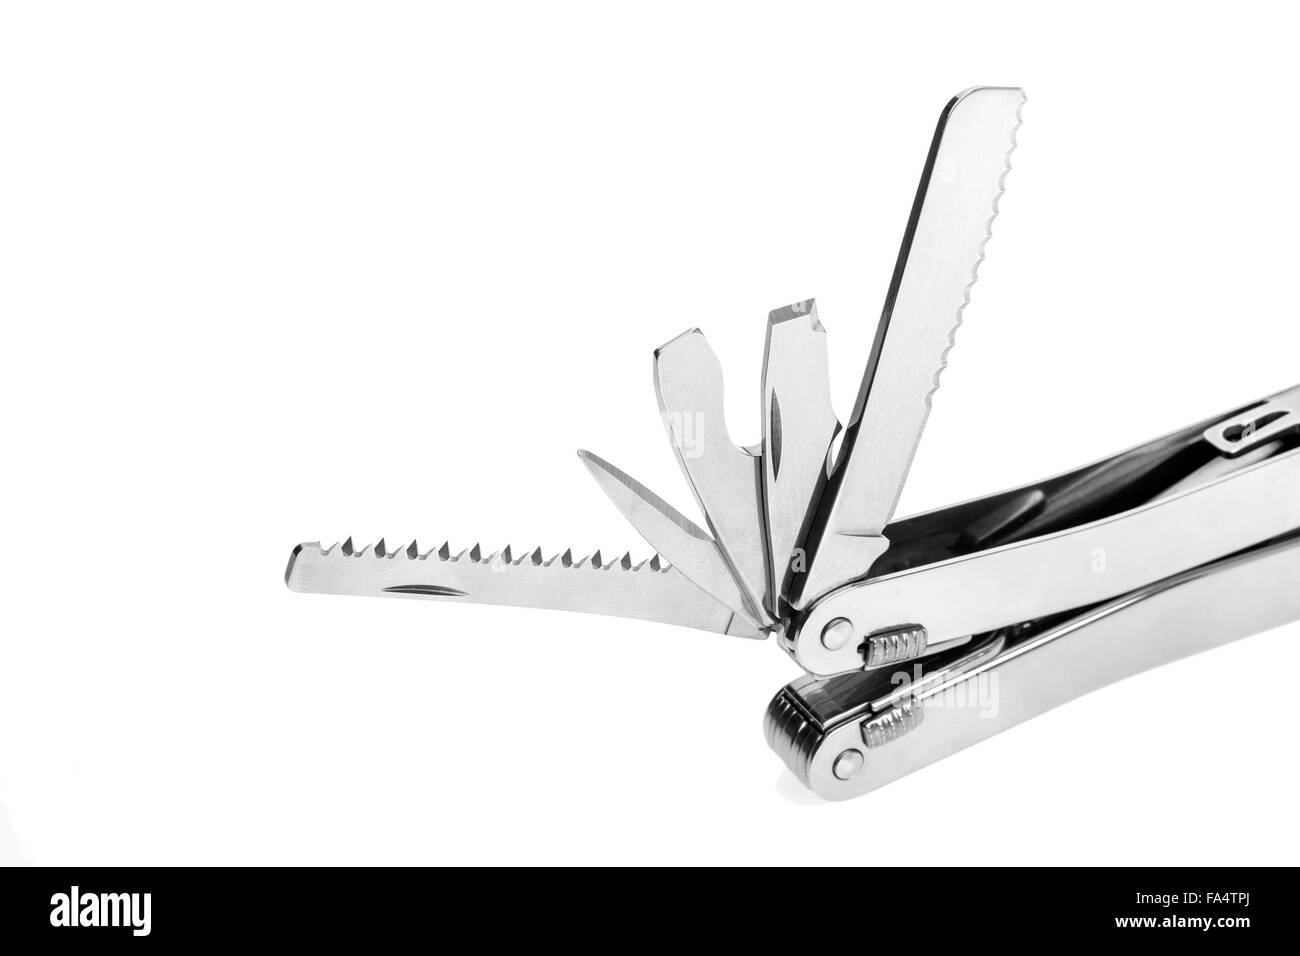 Stainless steel army knife multitool isolated on white Stock Photo